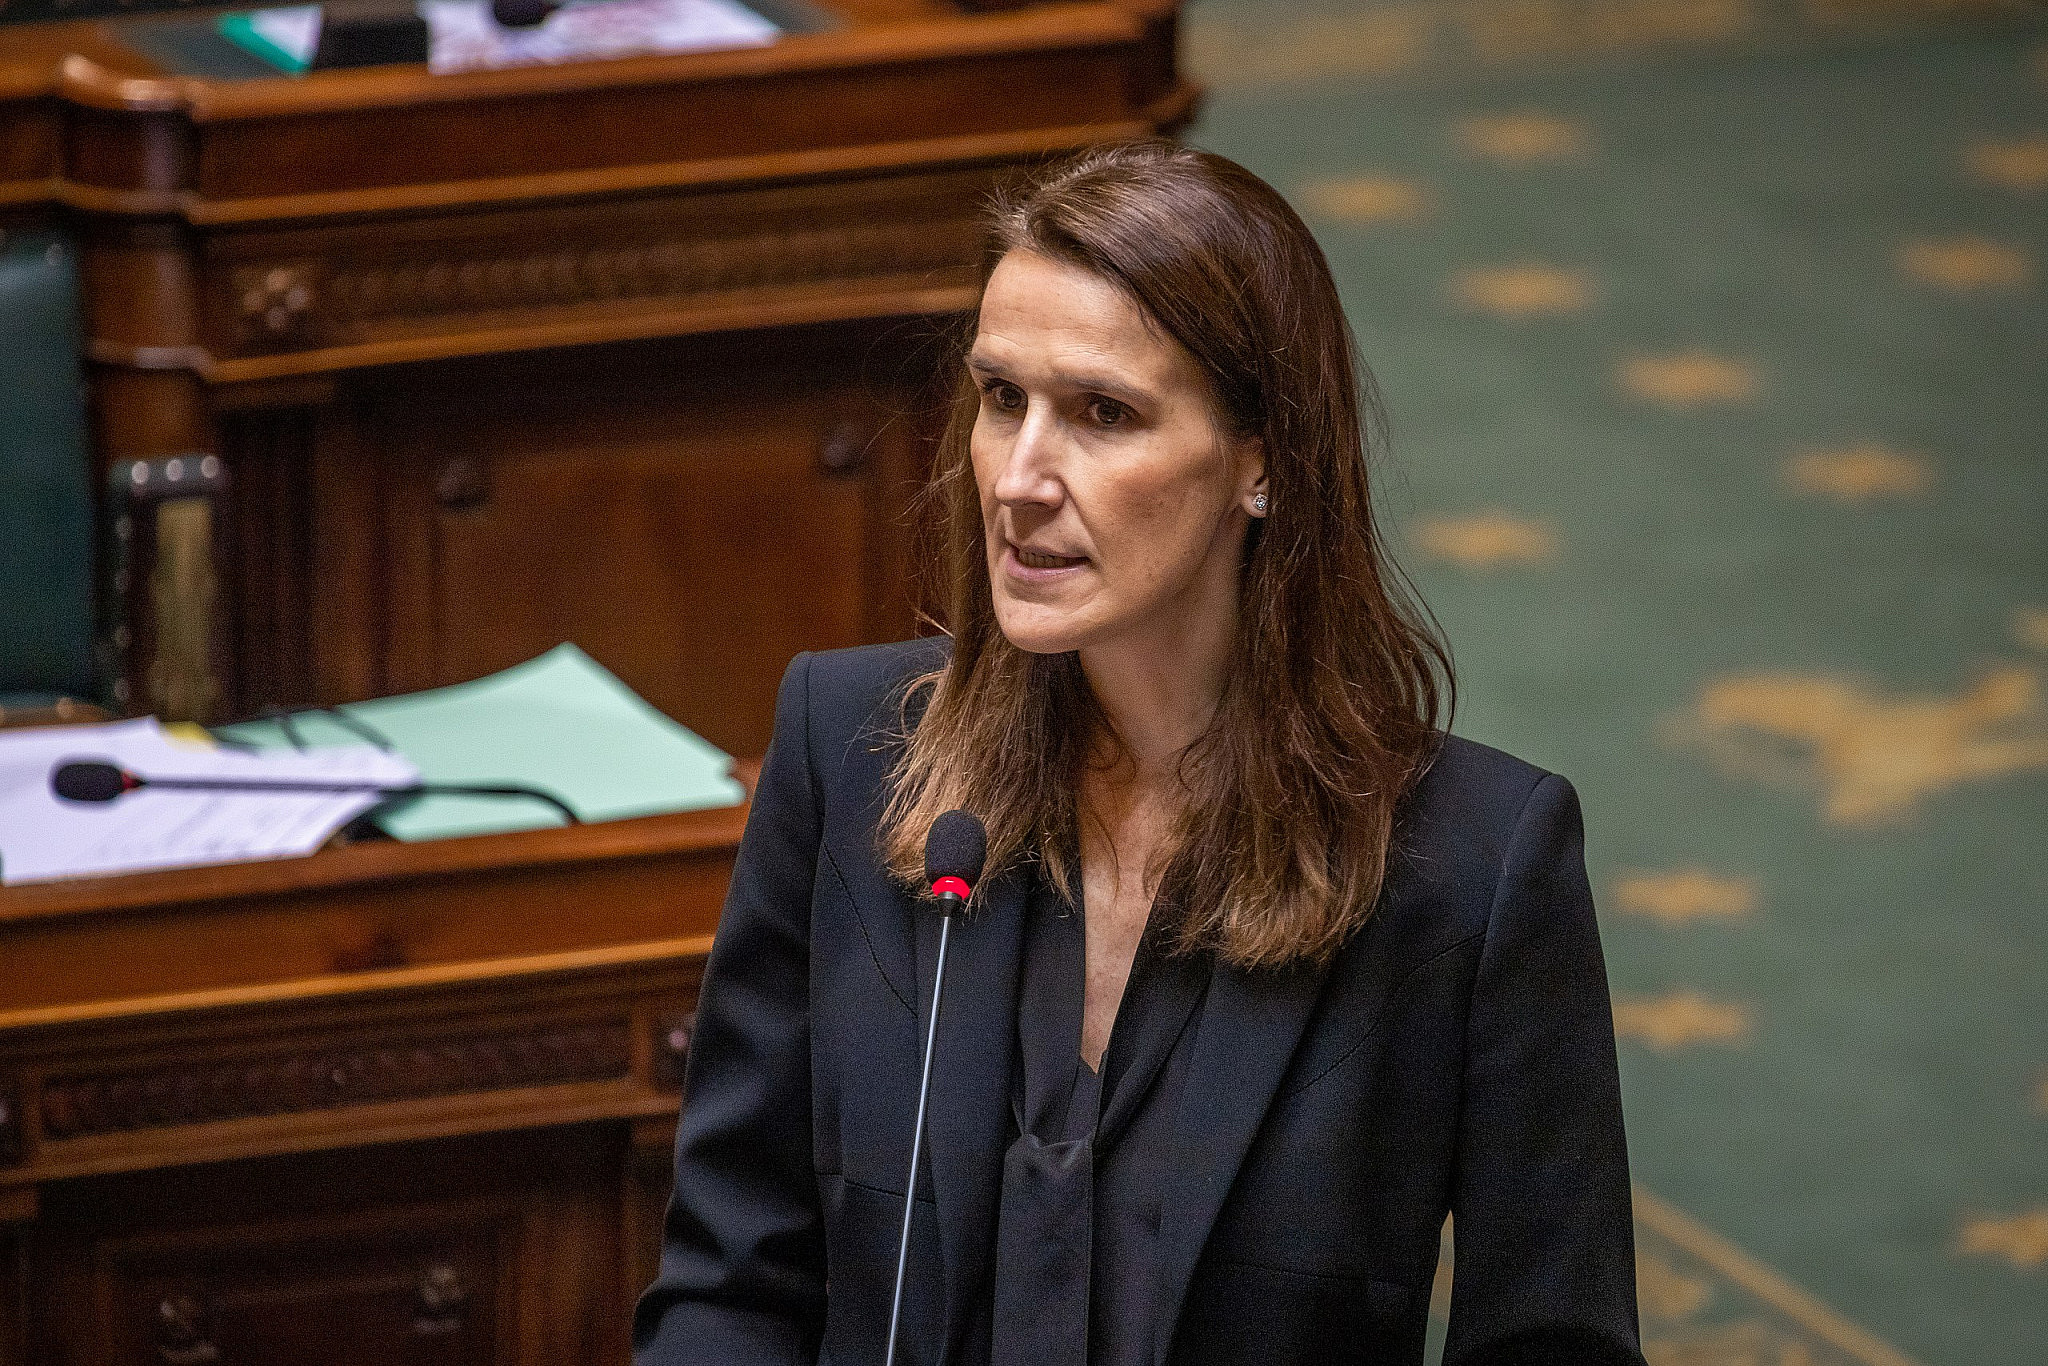 Belgian Foreign Minister Sophie Wilmès in the Chamber of Representatives, January 23, 2020. (Thomasdaems89/CC BY-SA 4.0)